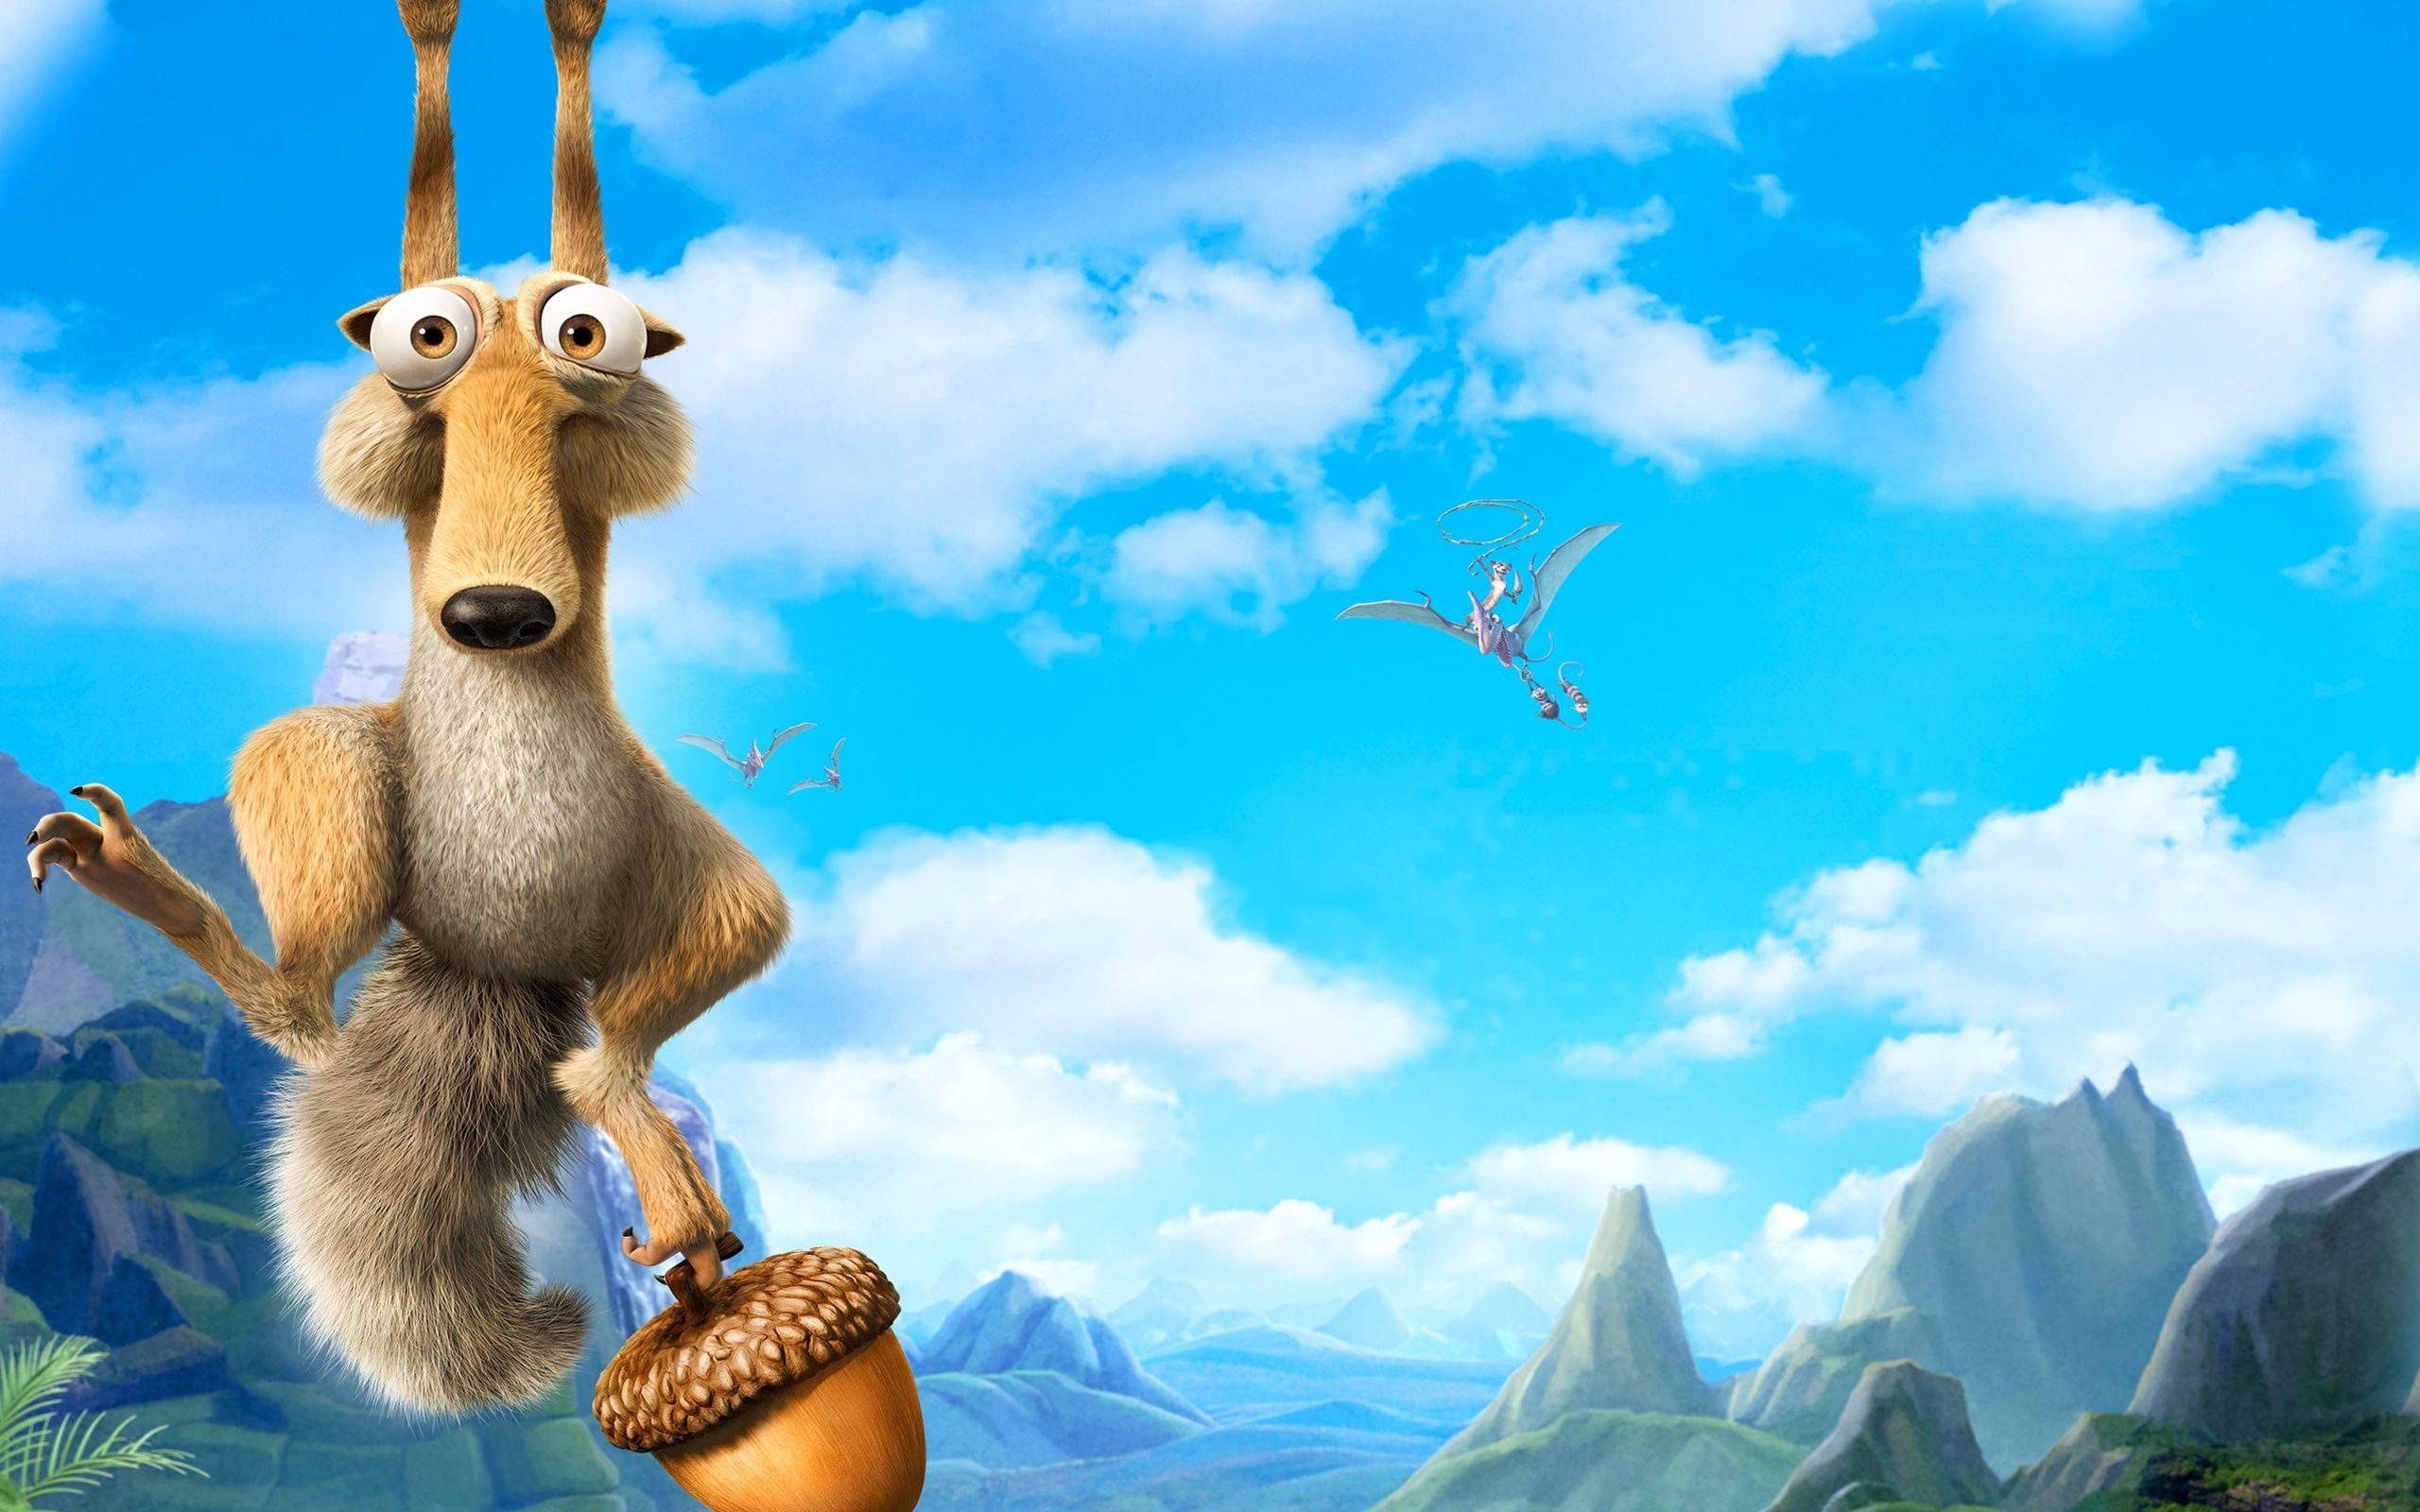 Ice Age movie wallpapers, Character backgrounds, Ice Age movie images, Animated films, 2560x1600 HD Desktop